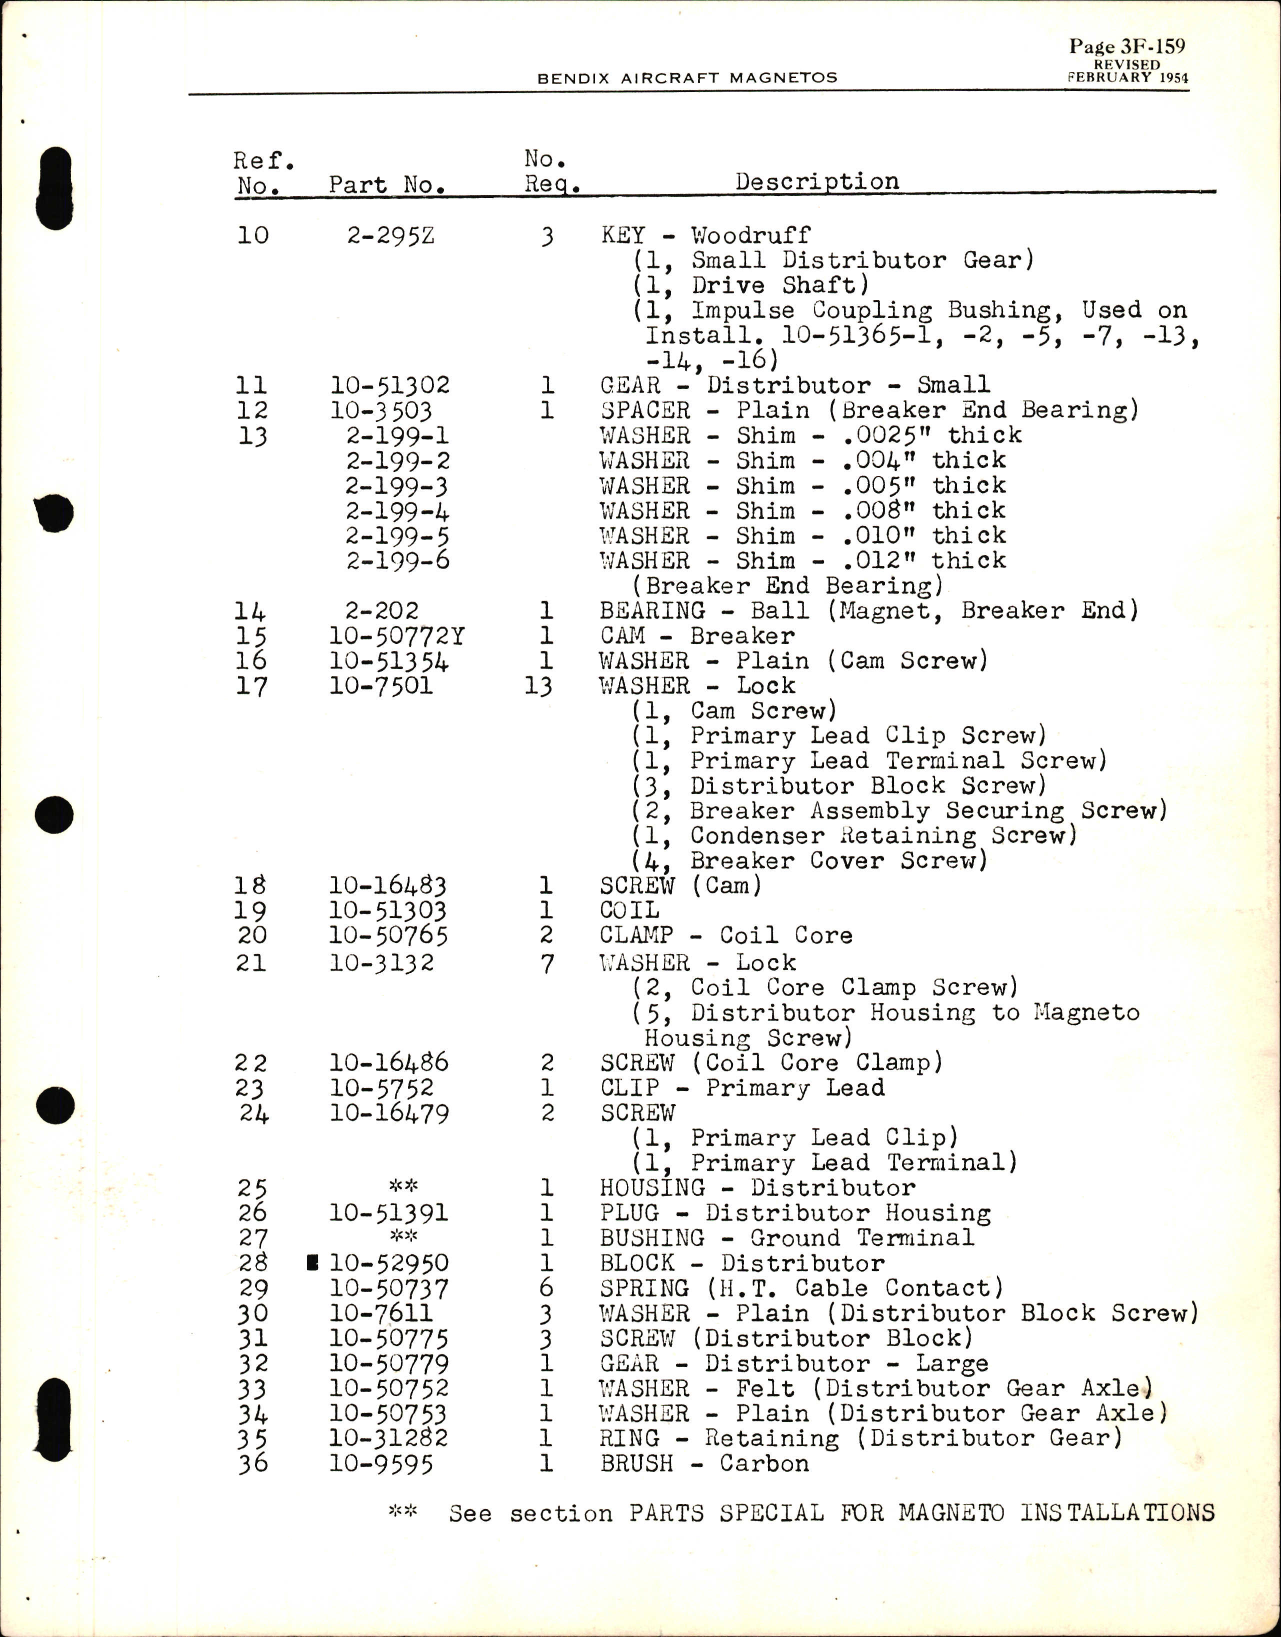 Sample page 5 from AirCorps Library document: Service Parts List for Bendix Aircraft Magnetos S6R(L)N-20 and S6R(L)N-21